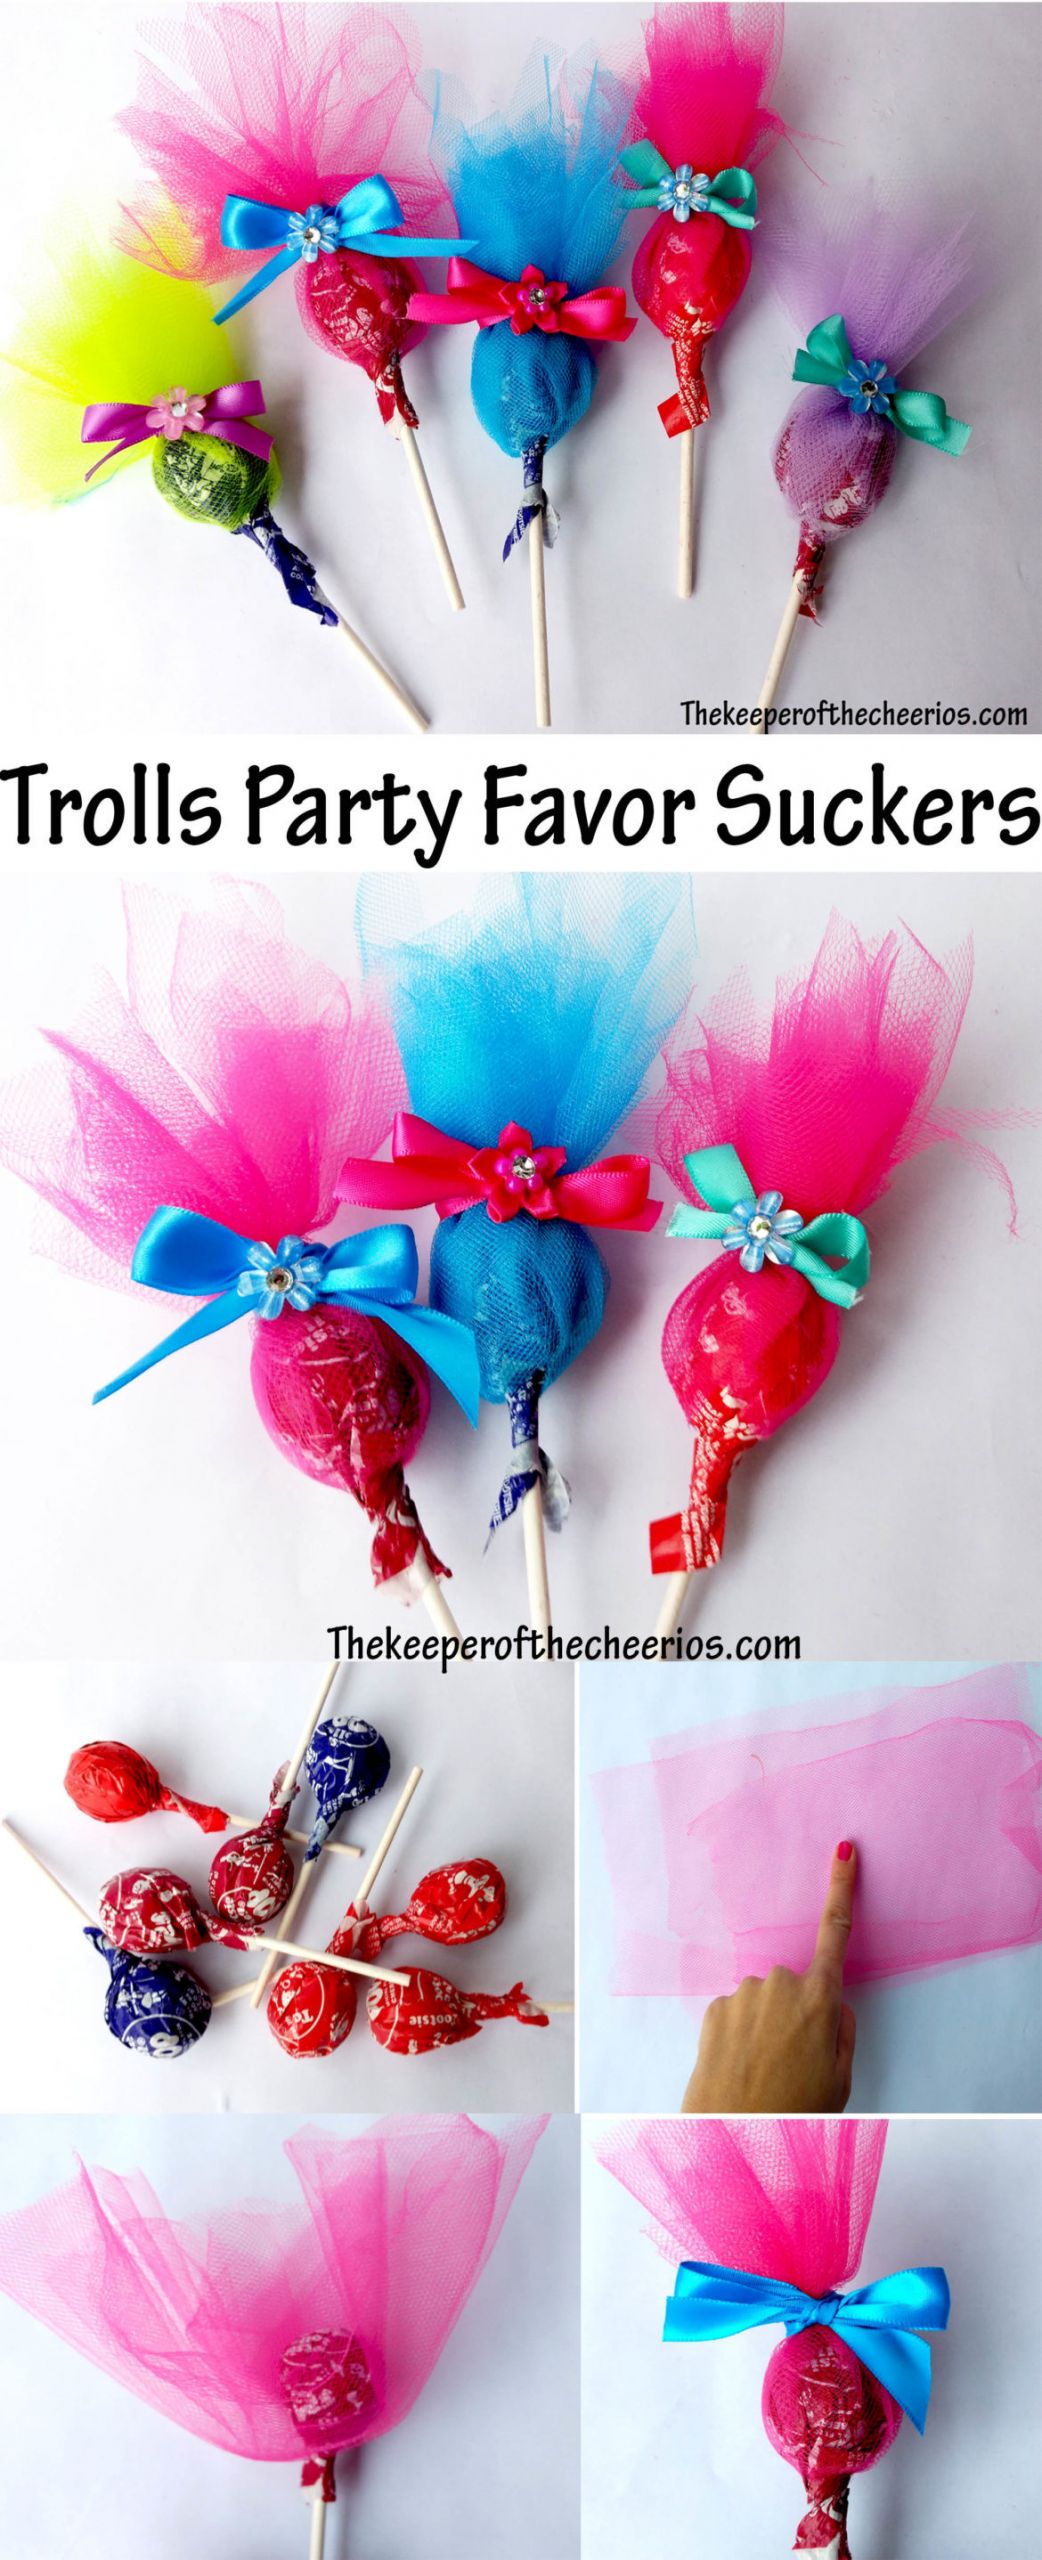 Trolls Party Ideas Diy
 Trolls Party Favor Suckers The Keeper of the Cheerios